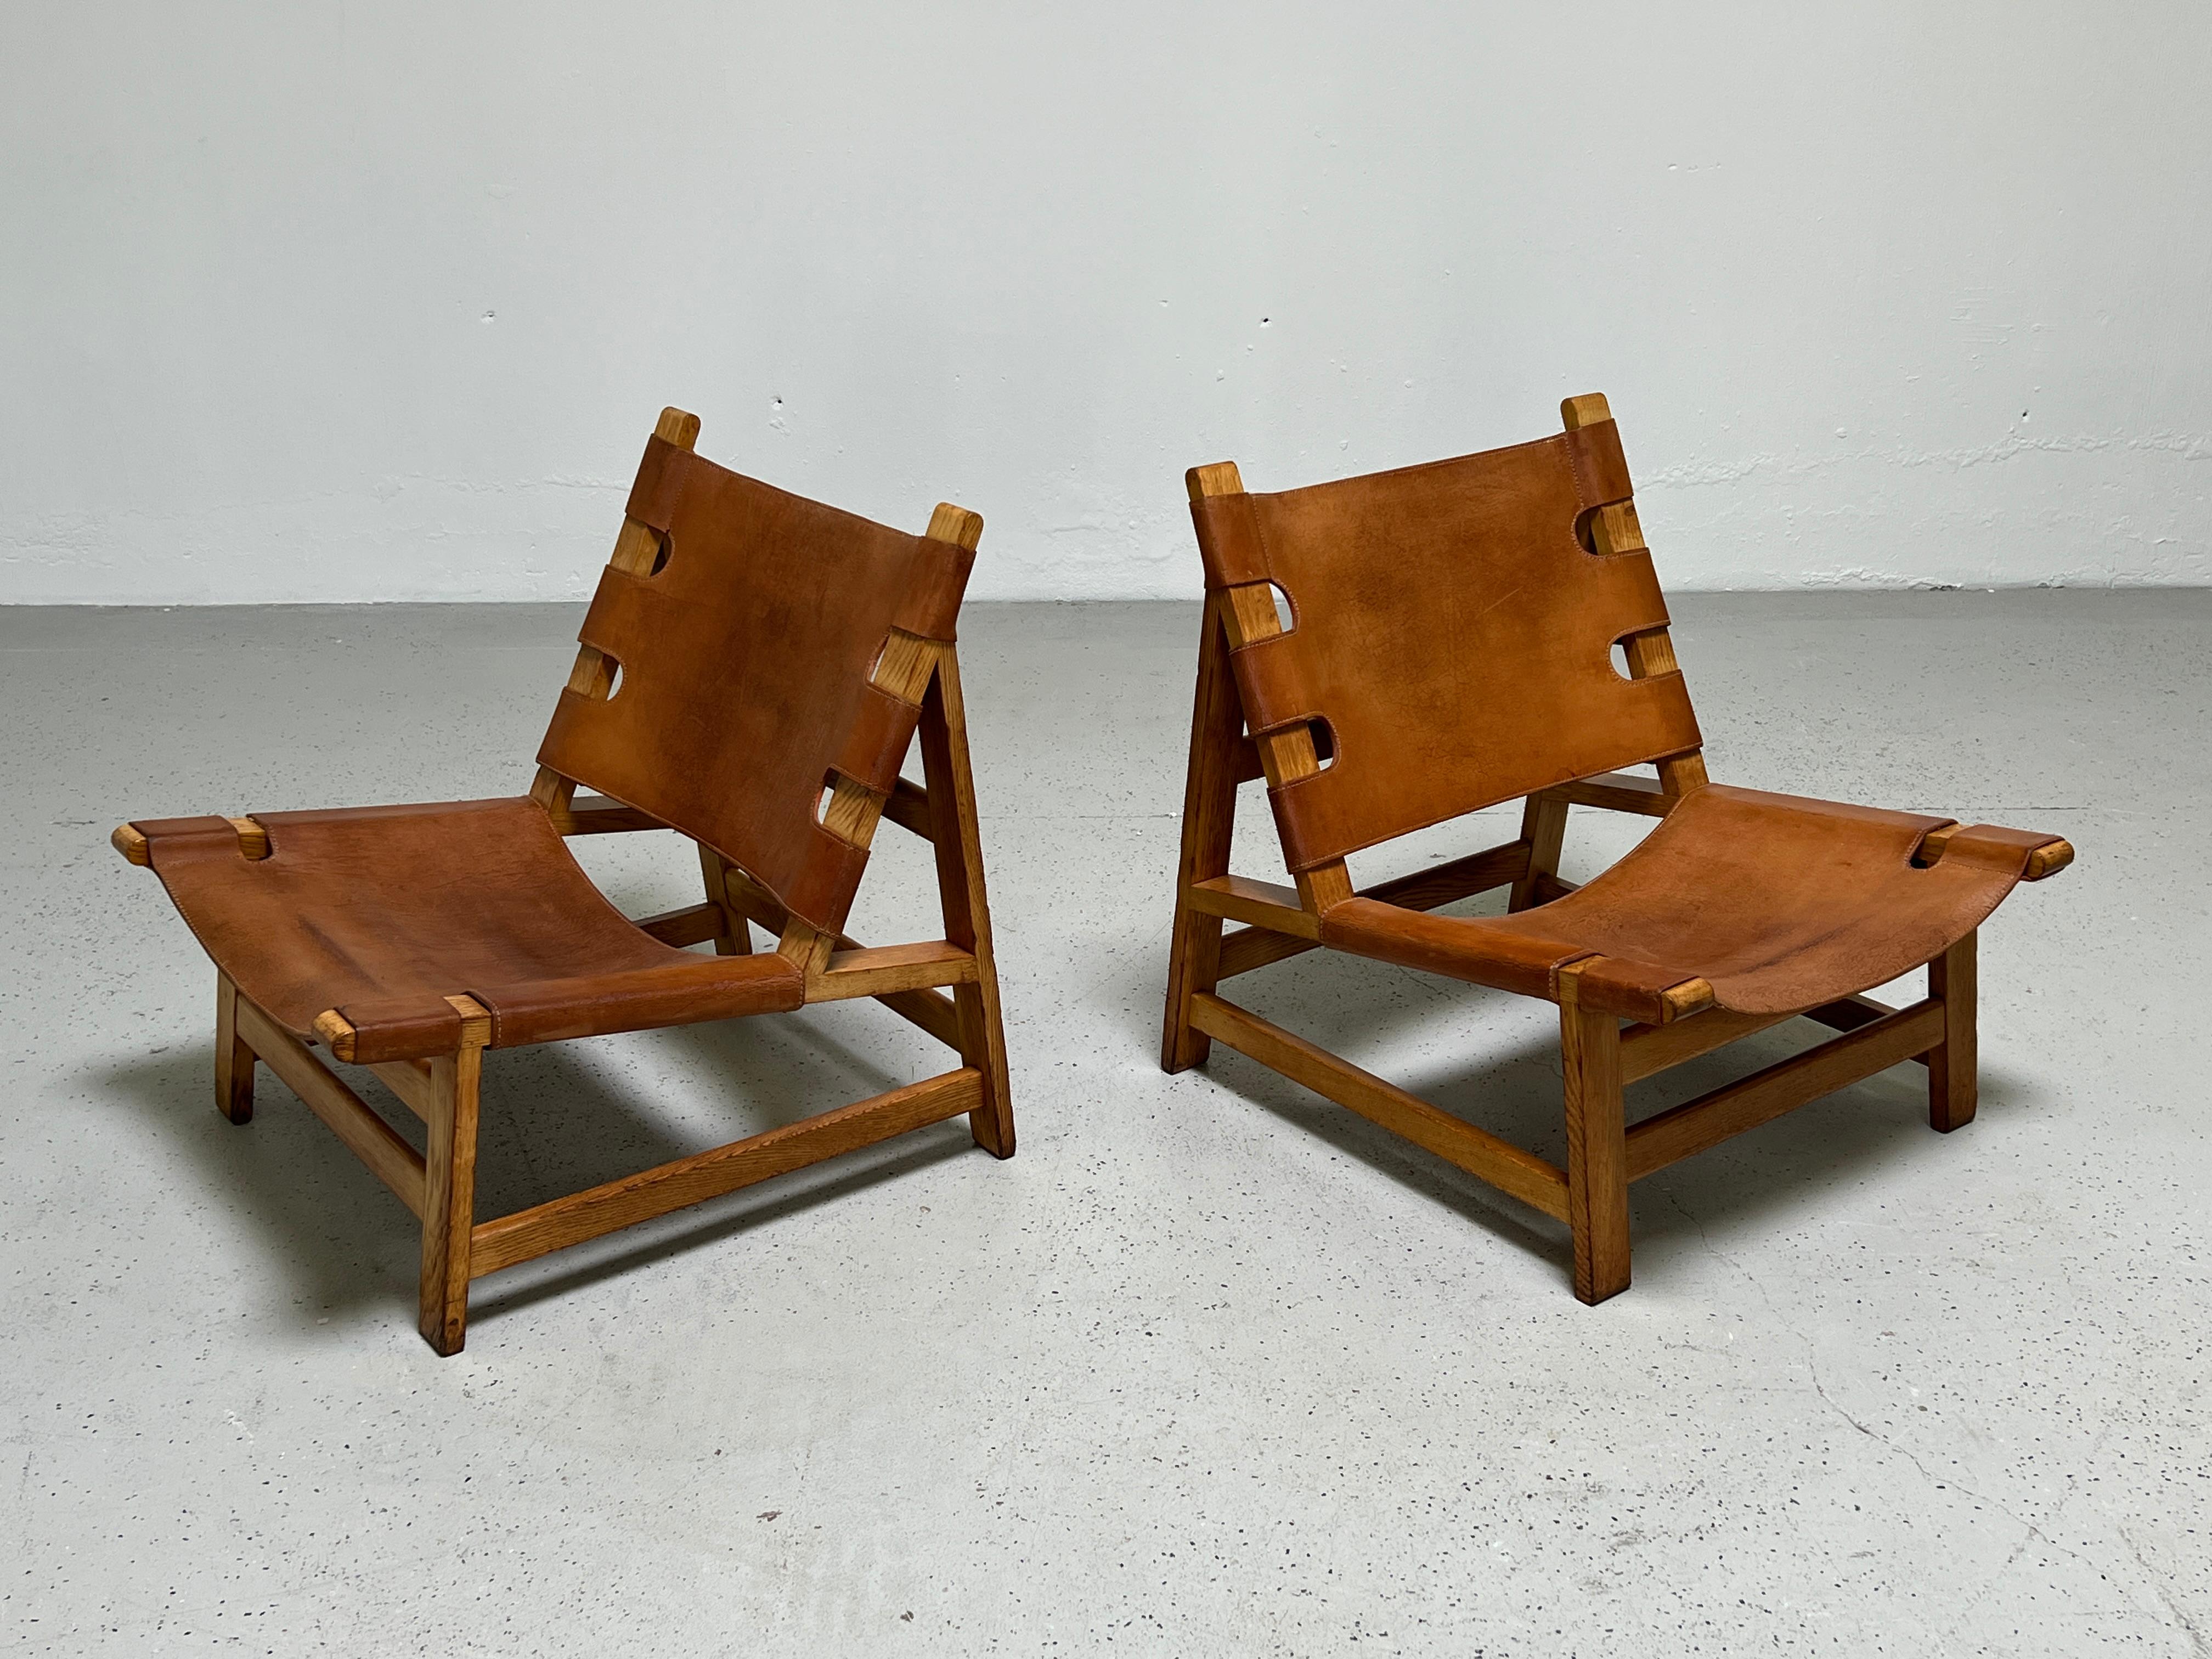 A pair of beautifully patinated oak and leather lounge chairs by Borge Mogensen for Fredericia Stolefabrik.